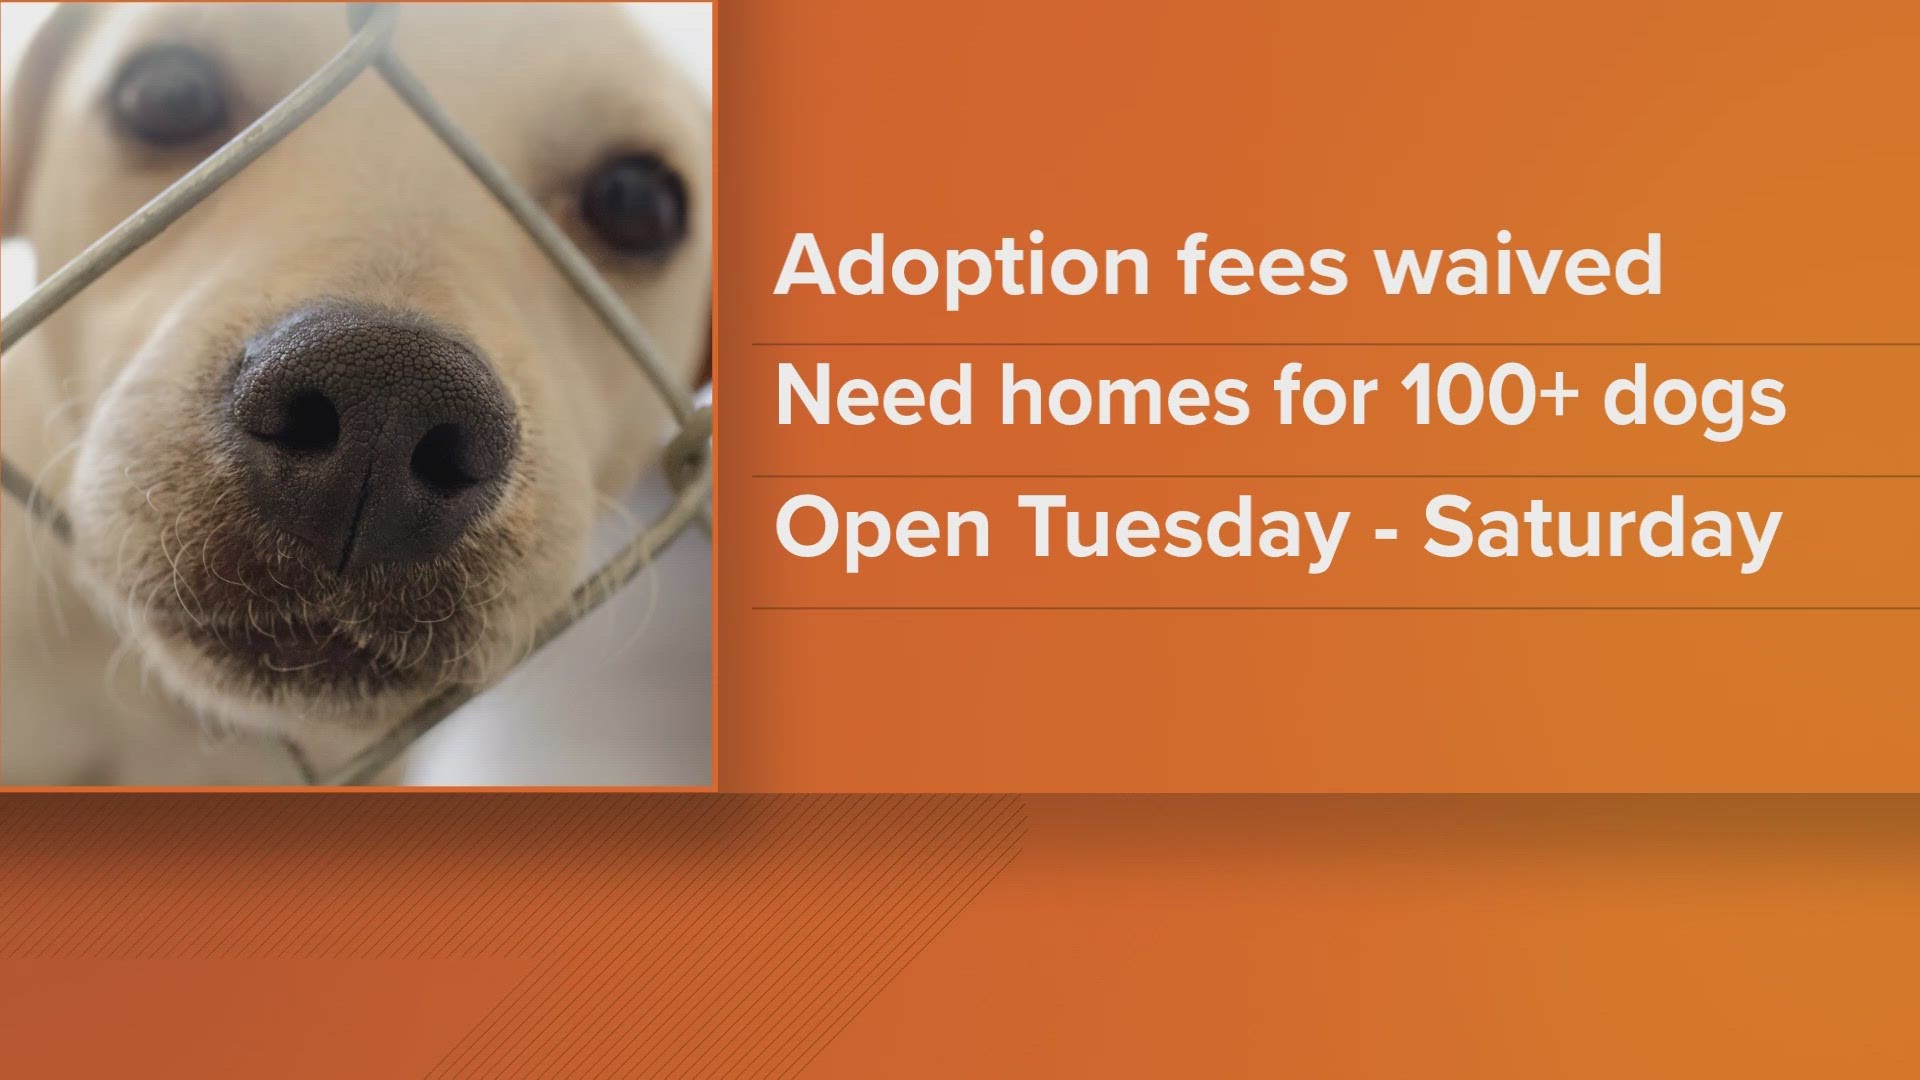 The shelter is hoping to find homes for 100 pups.